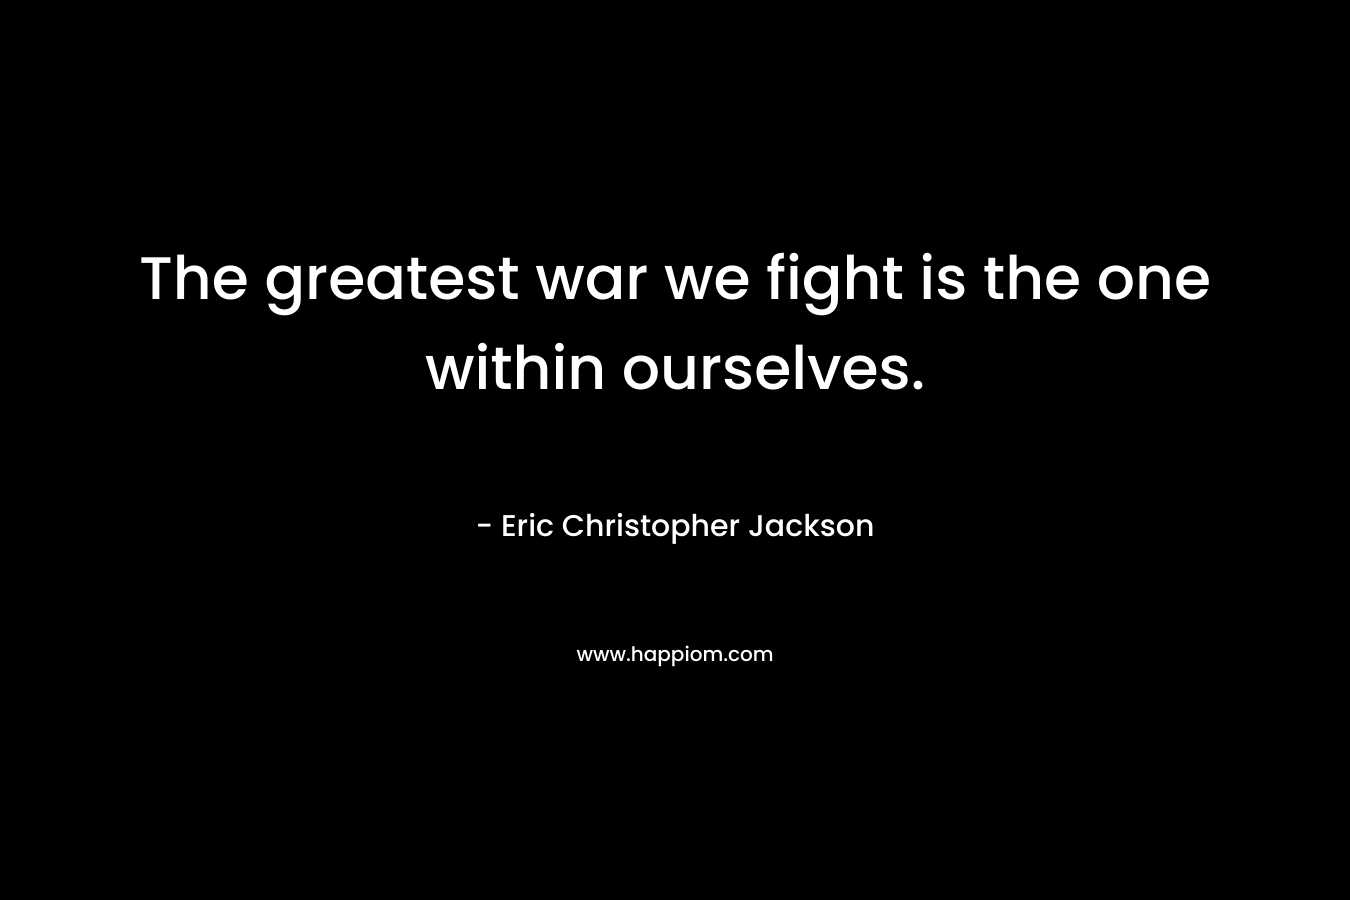 The greatest war we fight is the one within ourselves. – Eric Christopher Jackson